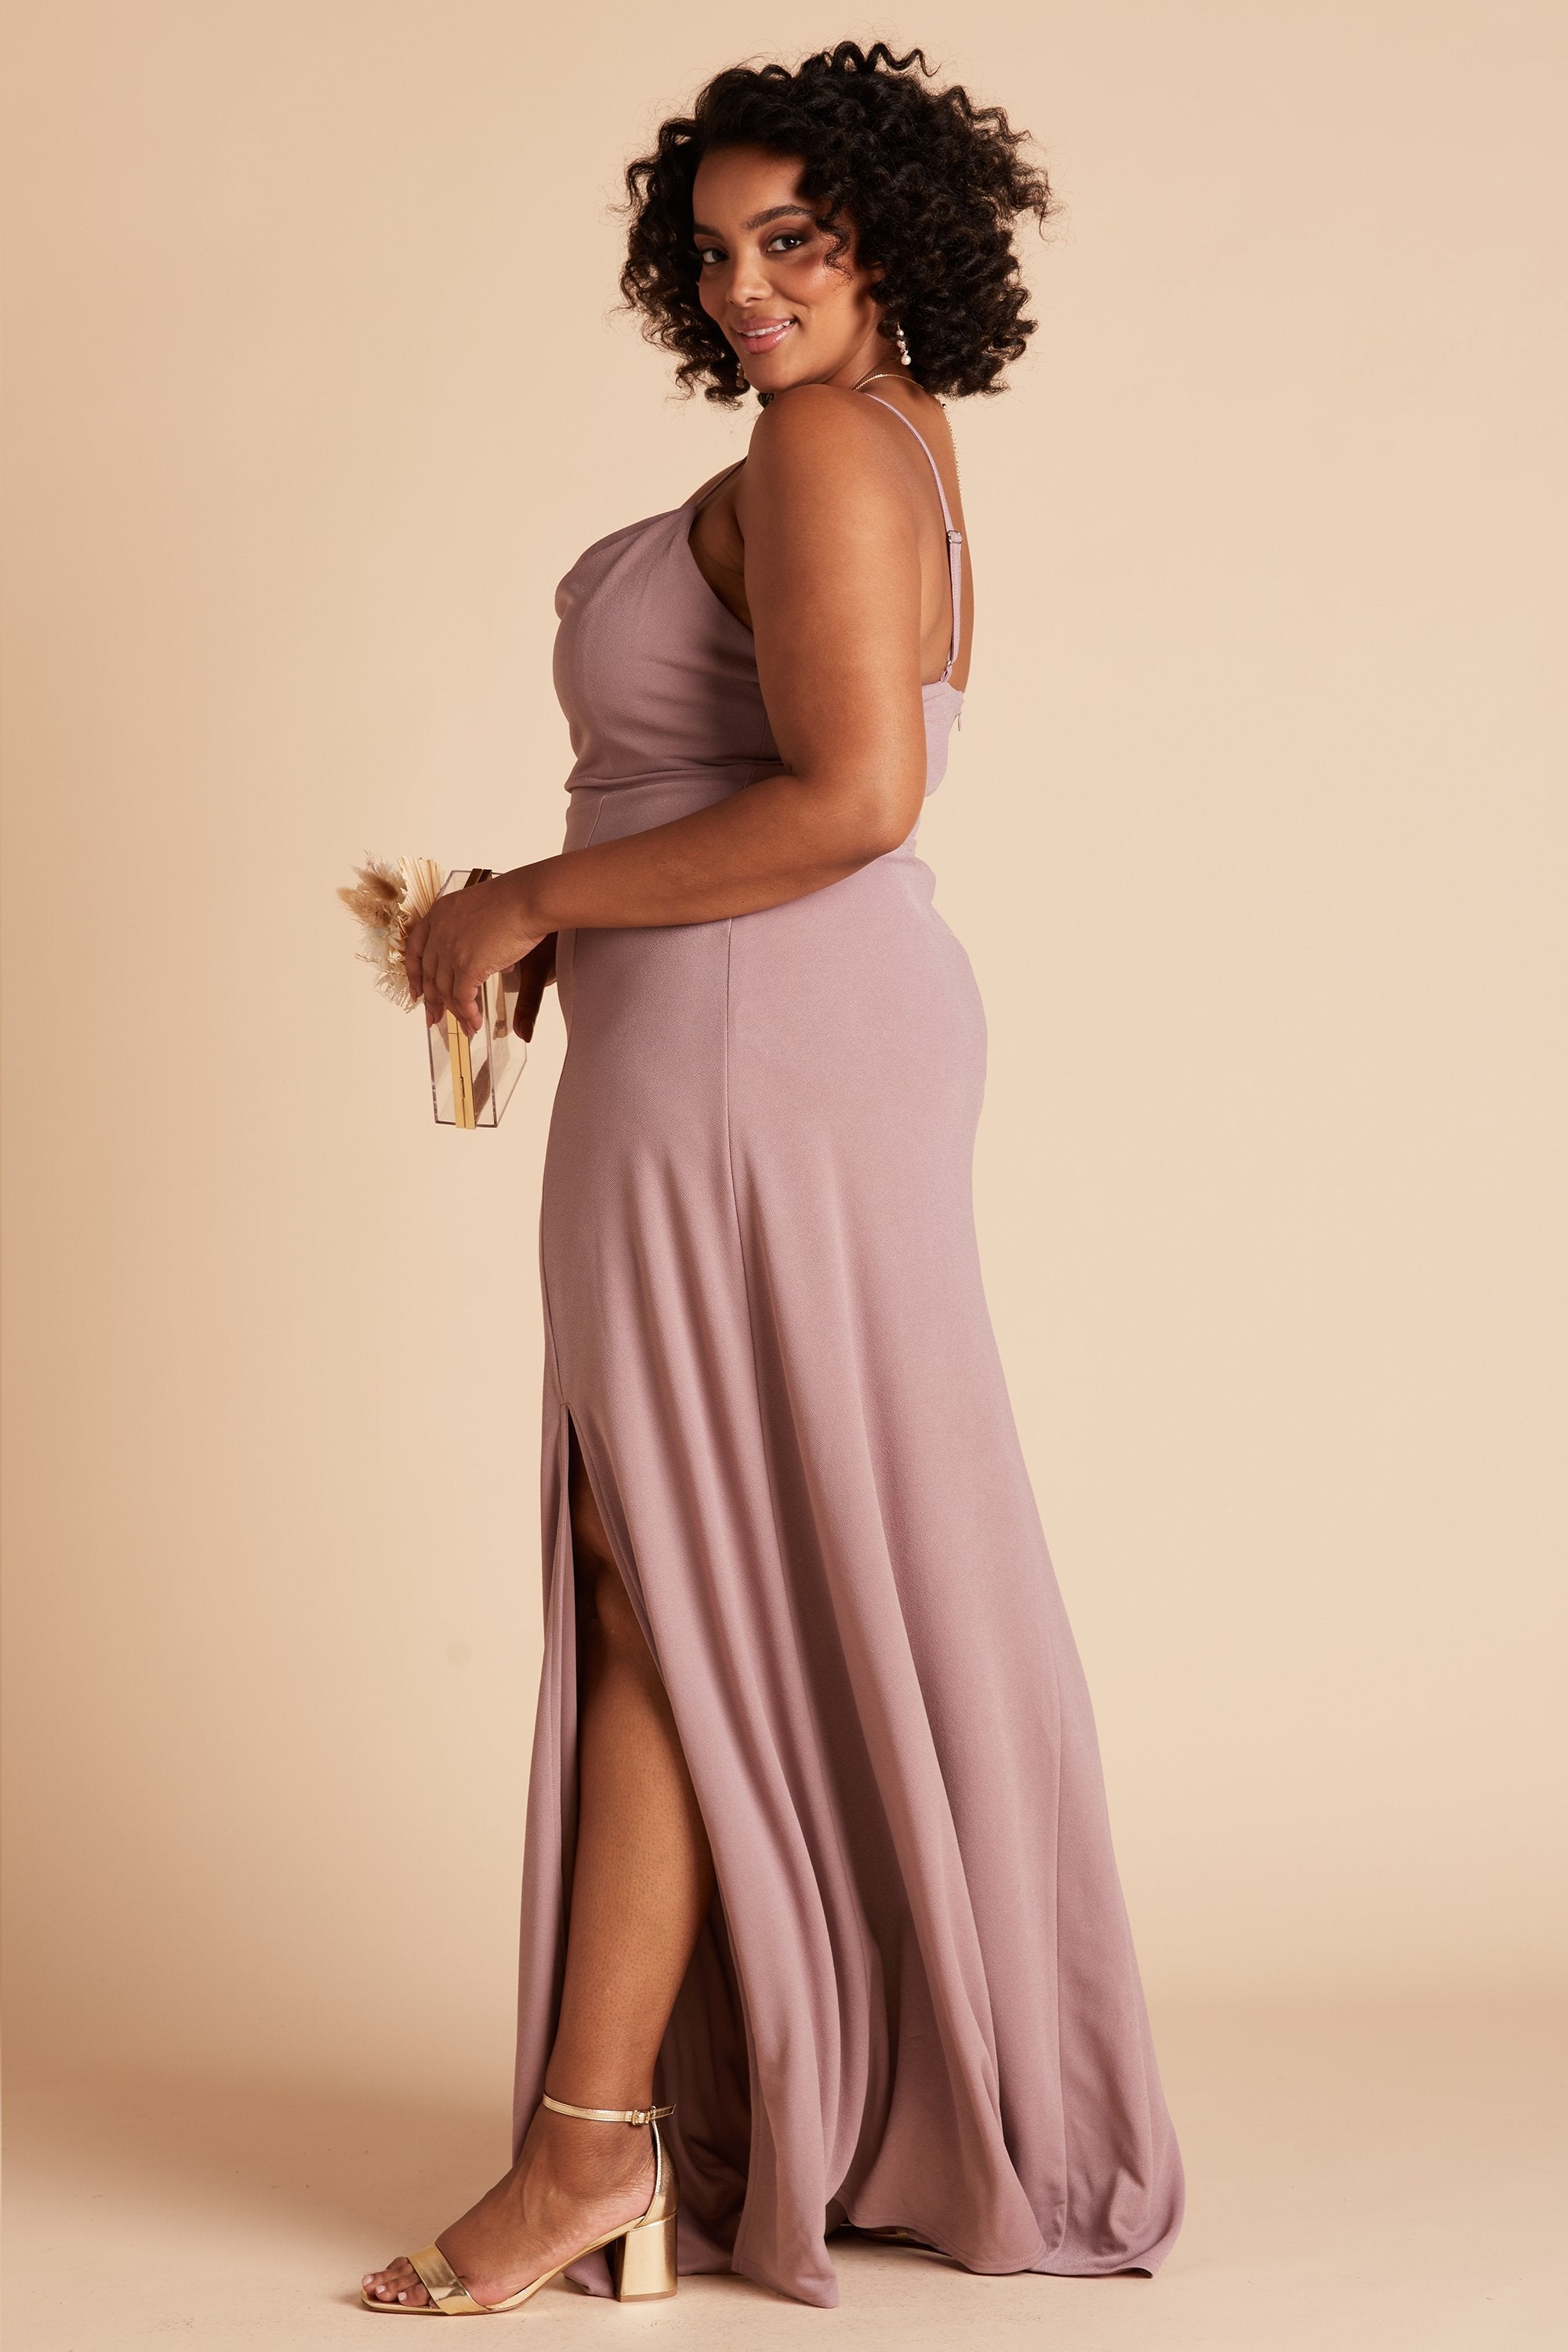 Ash plus size bridesmaid dress with slit in dark mauve crepe by Birdy Grey, side view